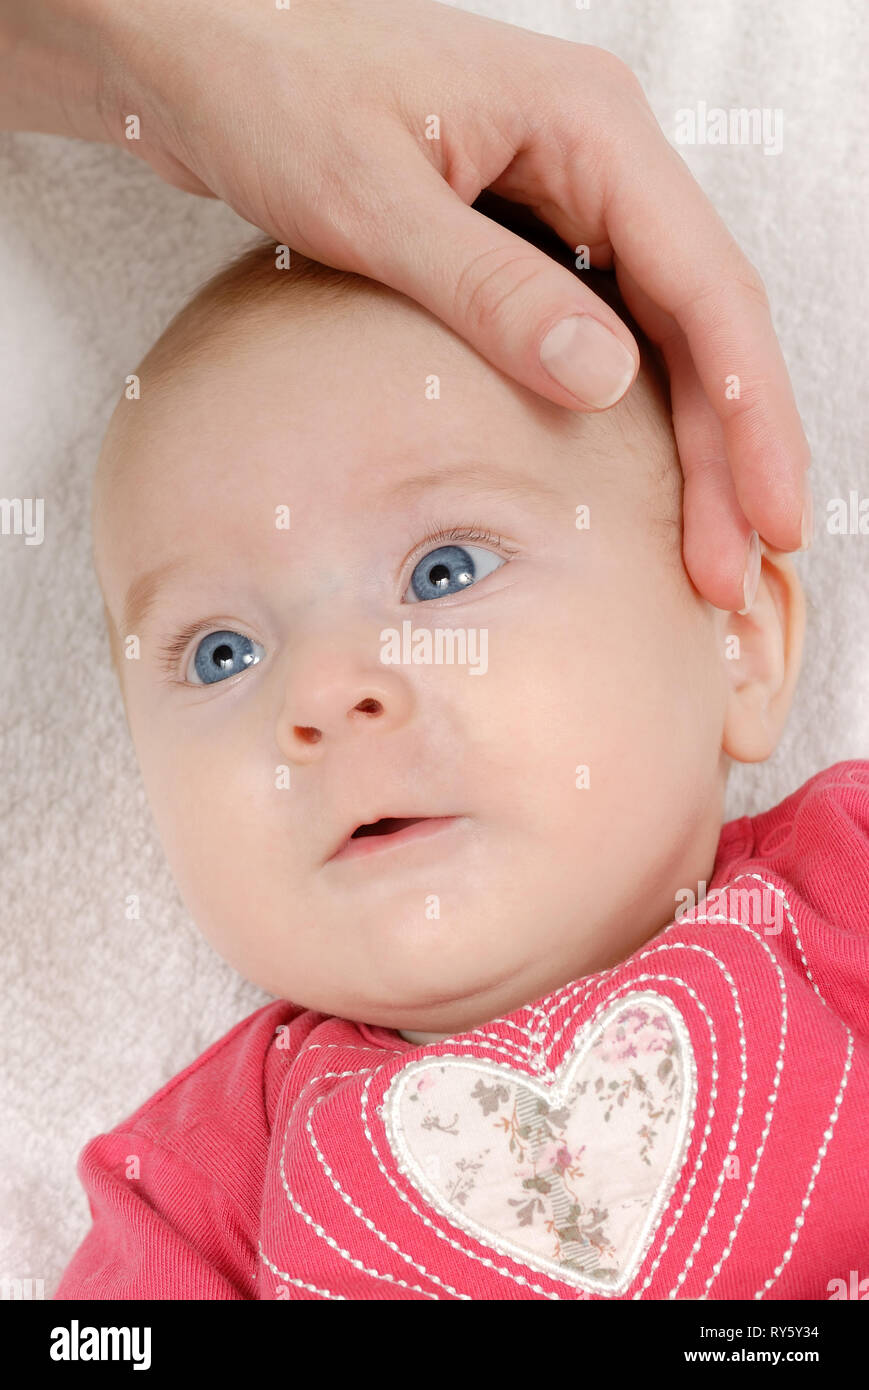 Cute newborn, baby girl lying on a white blanket and her mother's hand Stock Photo